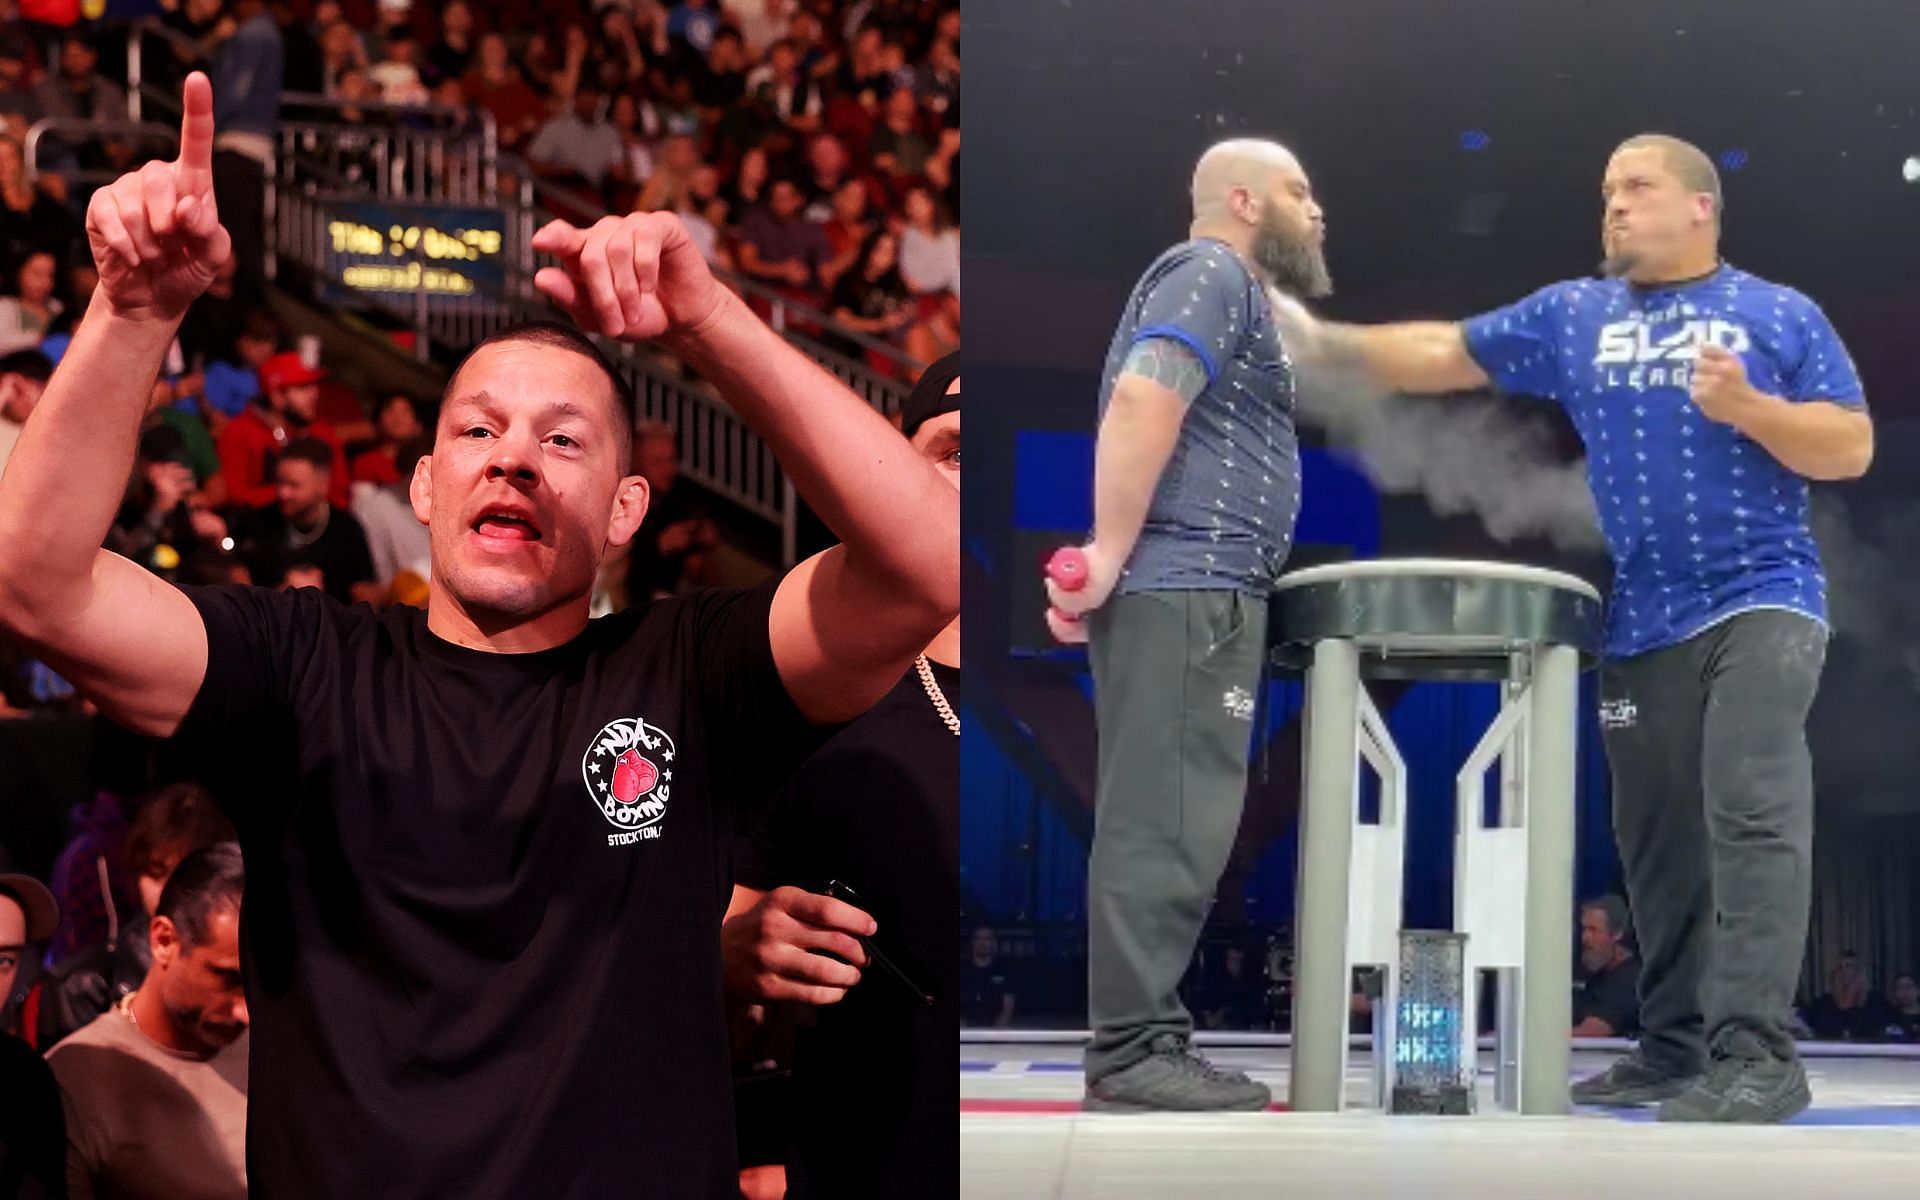 Nate Diaz (left) and A Power Slap League match (right) (Image credits Getty Images and @powerslapleague on Twitter)